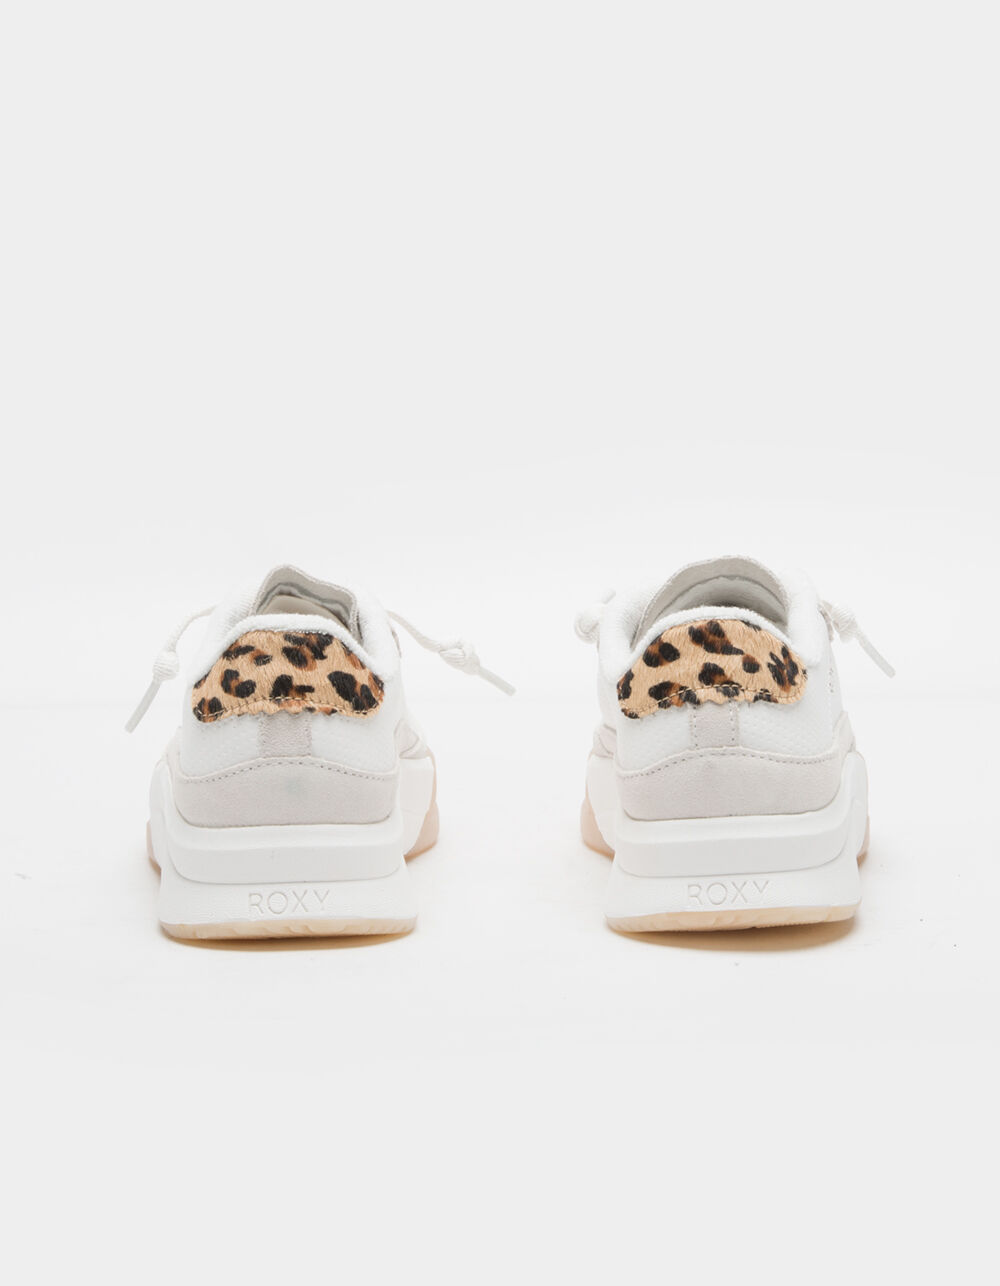 ROXY Joey Womens Shoes - WHITE | Tillys